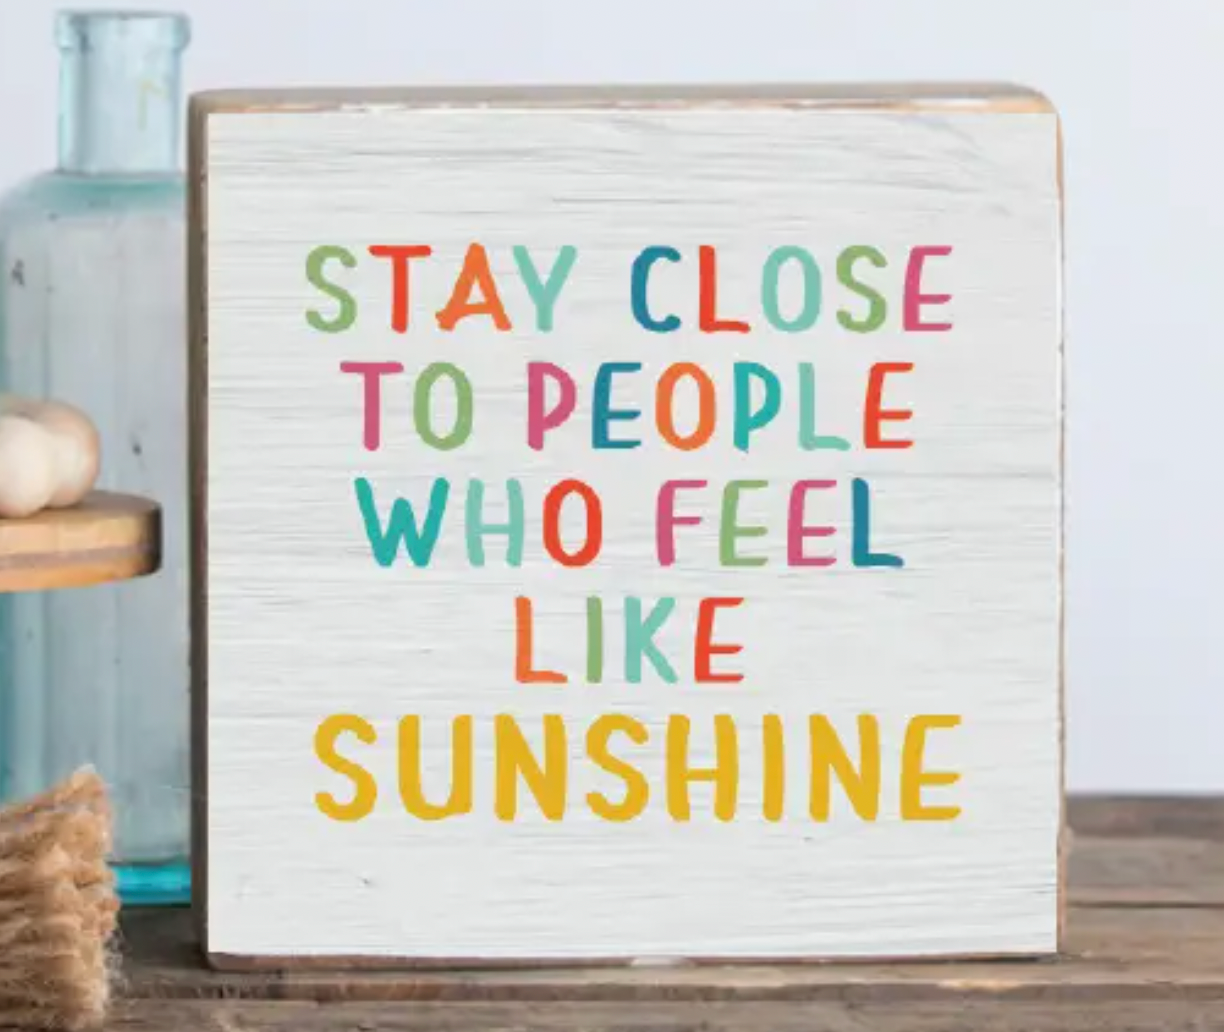 STAY CLOSE TO SUNSHINE SQUARE TWINE SIGN